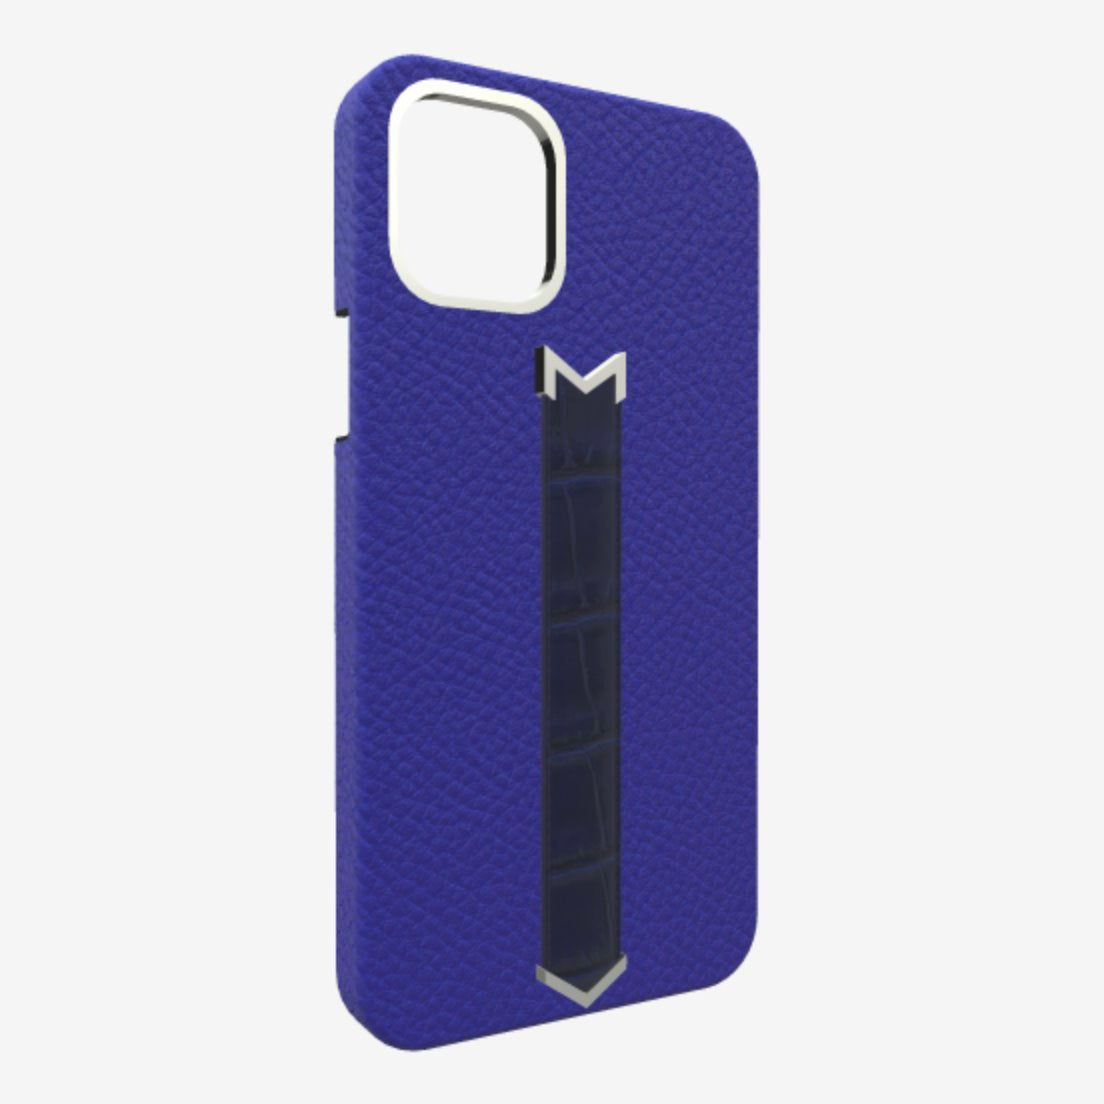 Silver Finger Strap Case for iPhone 13 Pro in Genuine Calfskin and Alligator Electric-Blue Navy-Blue 